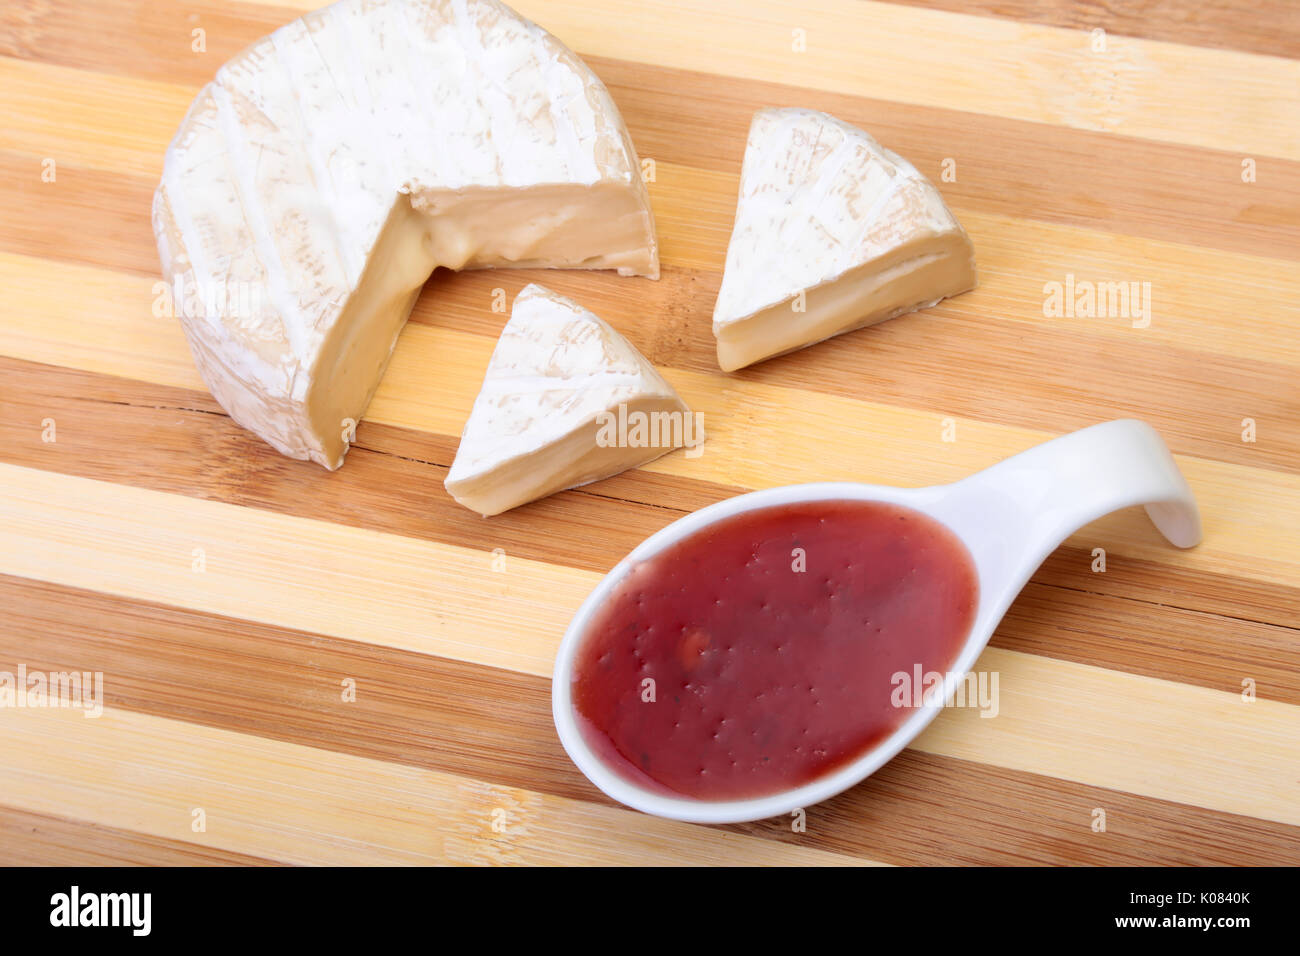 Cheese with white mold. Camembert or brie type with Cranberry sauce.. Healthy breakfast. Stock Photo